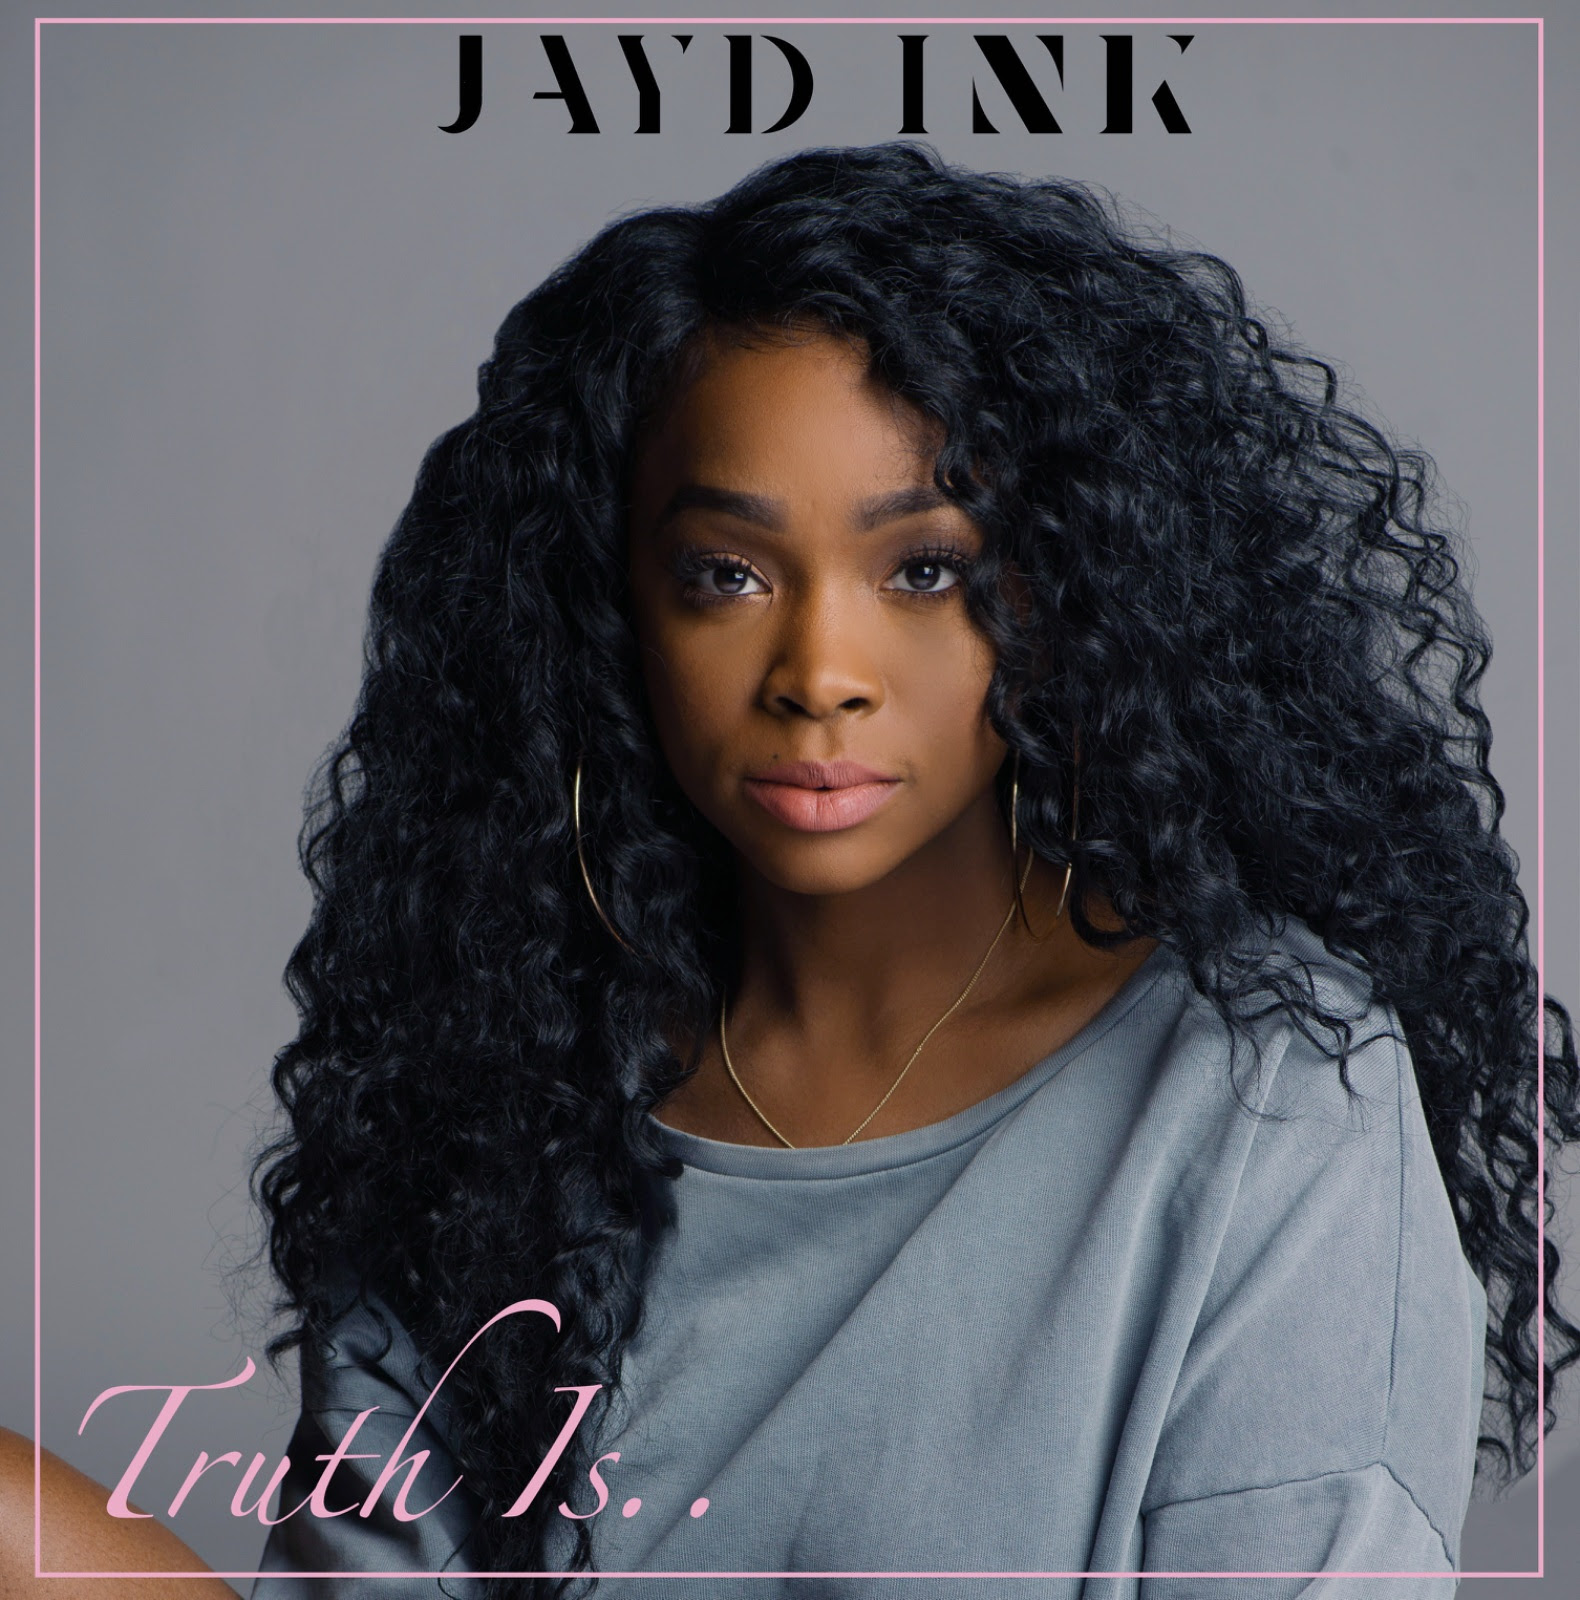 New Music: Jayd Ink - Truth Is